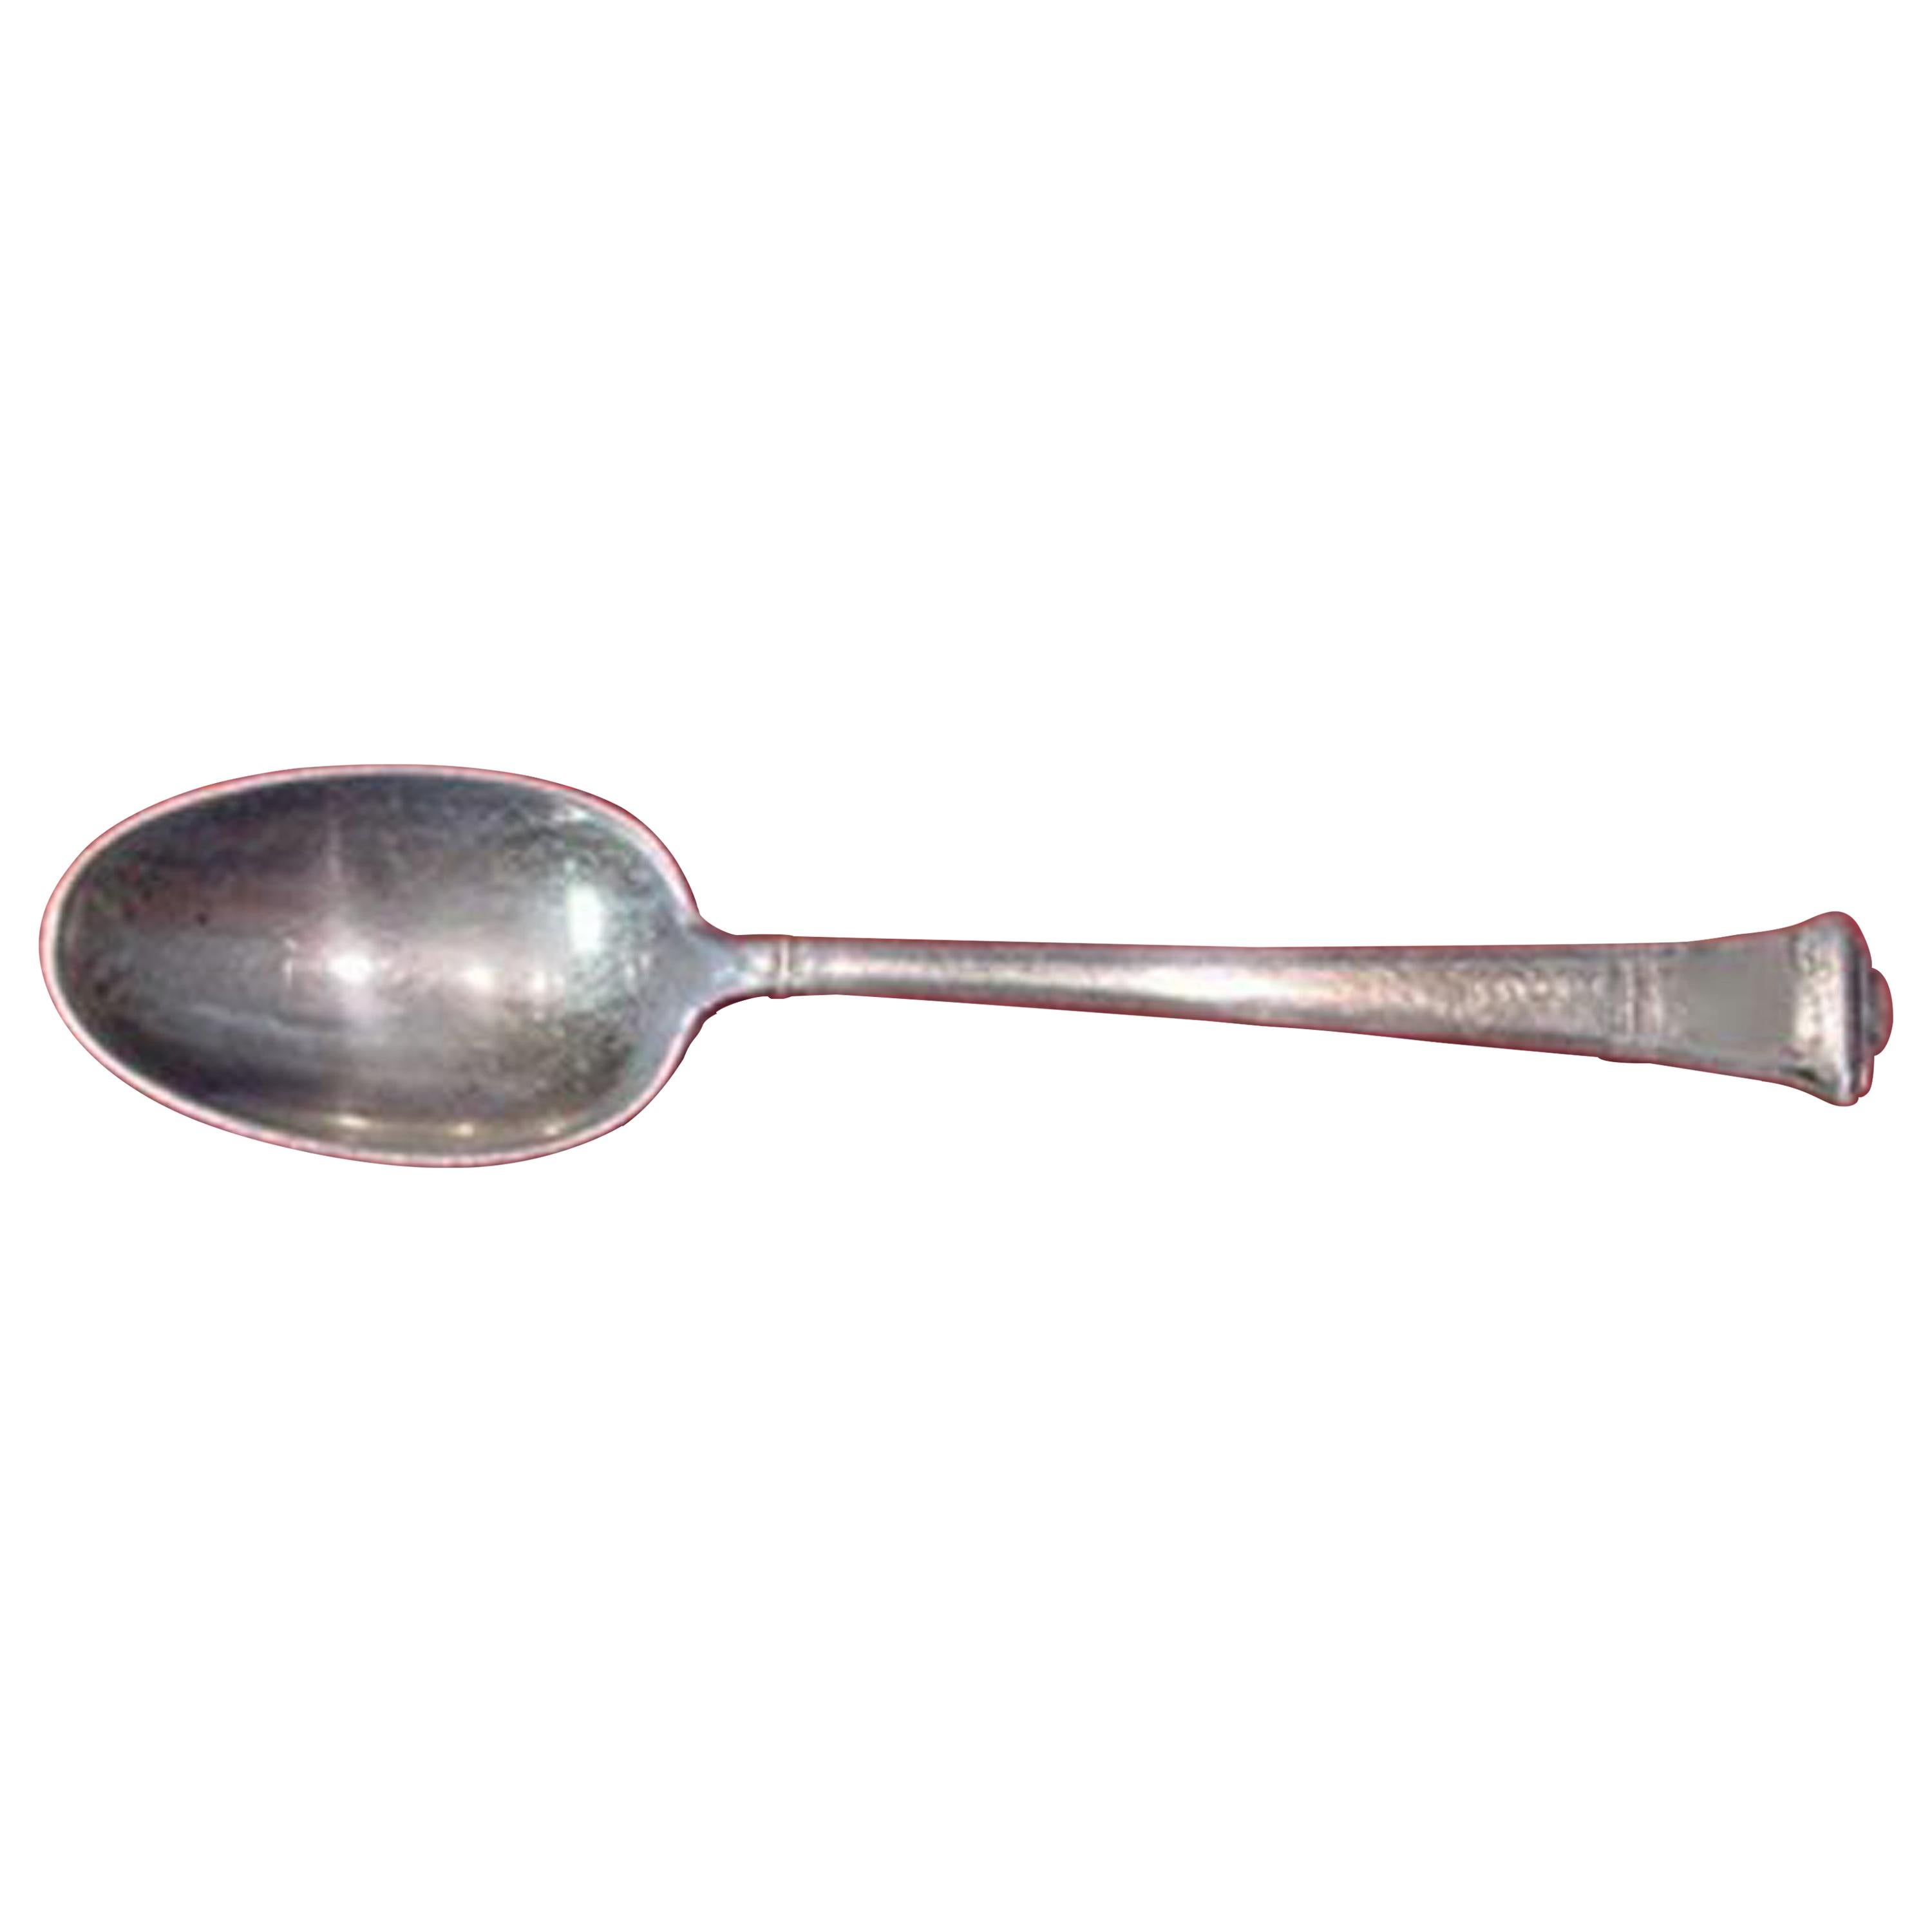 Windham by Tiffany & Co. Sterling Silver Demitasse Spoon